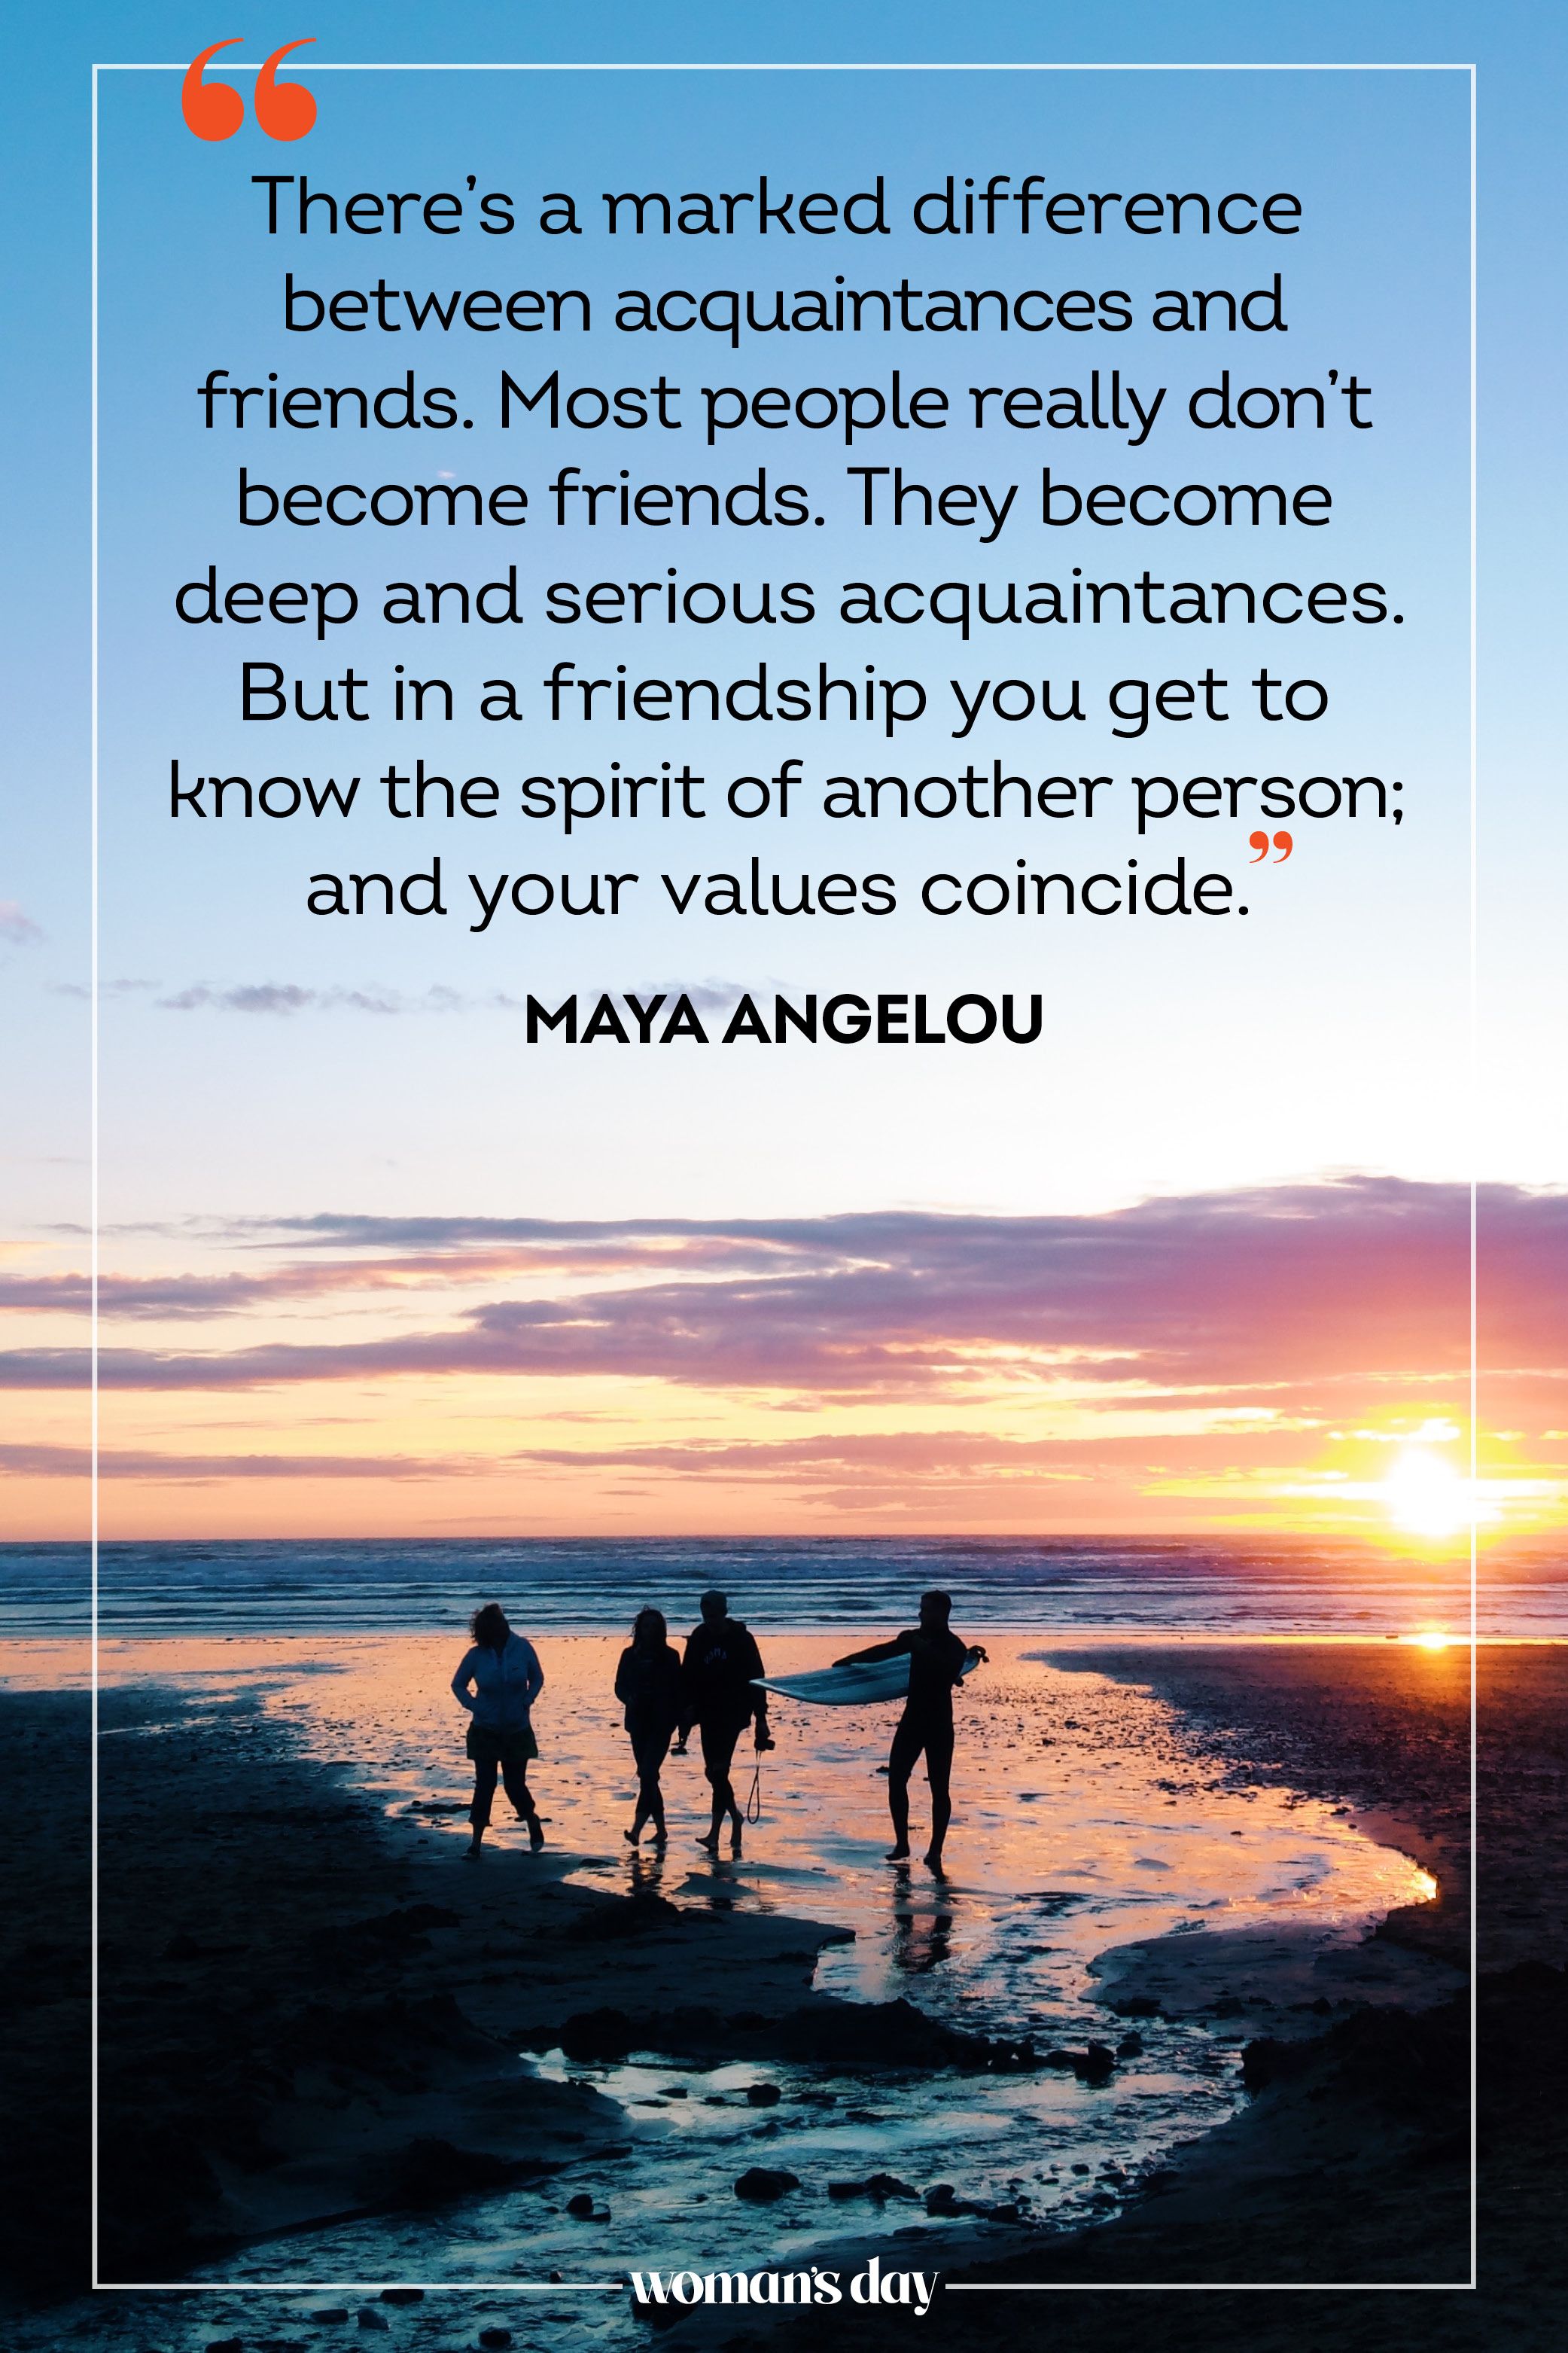 Famous Quotes About Family And Friends